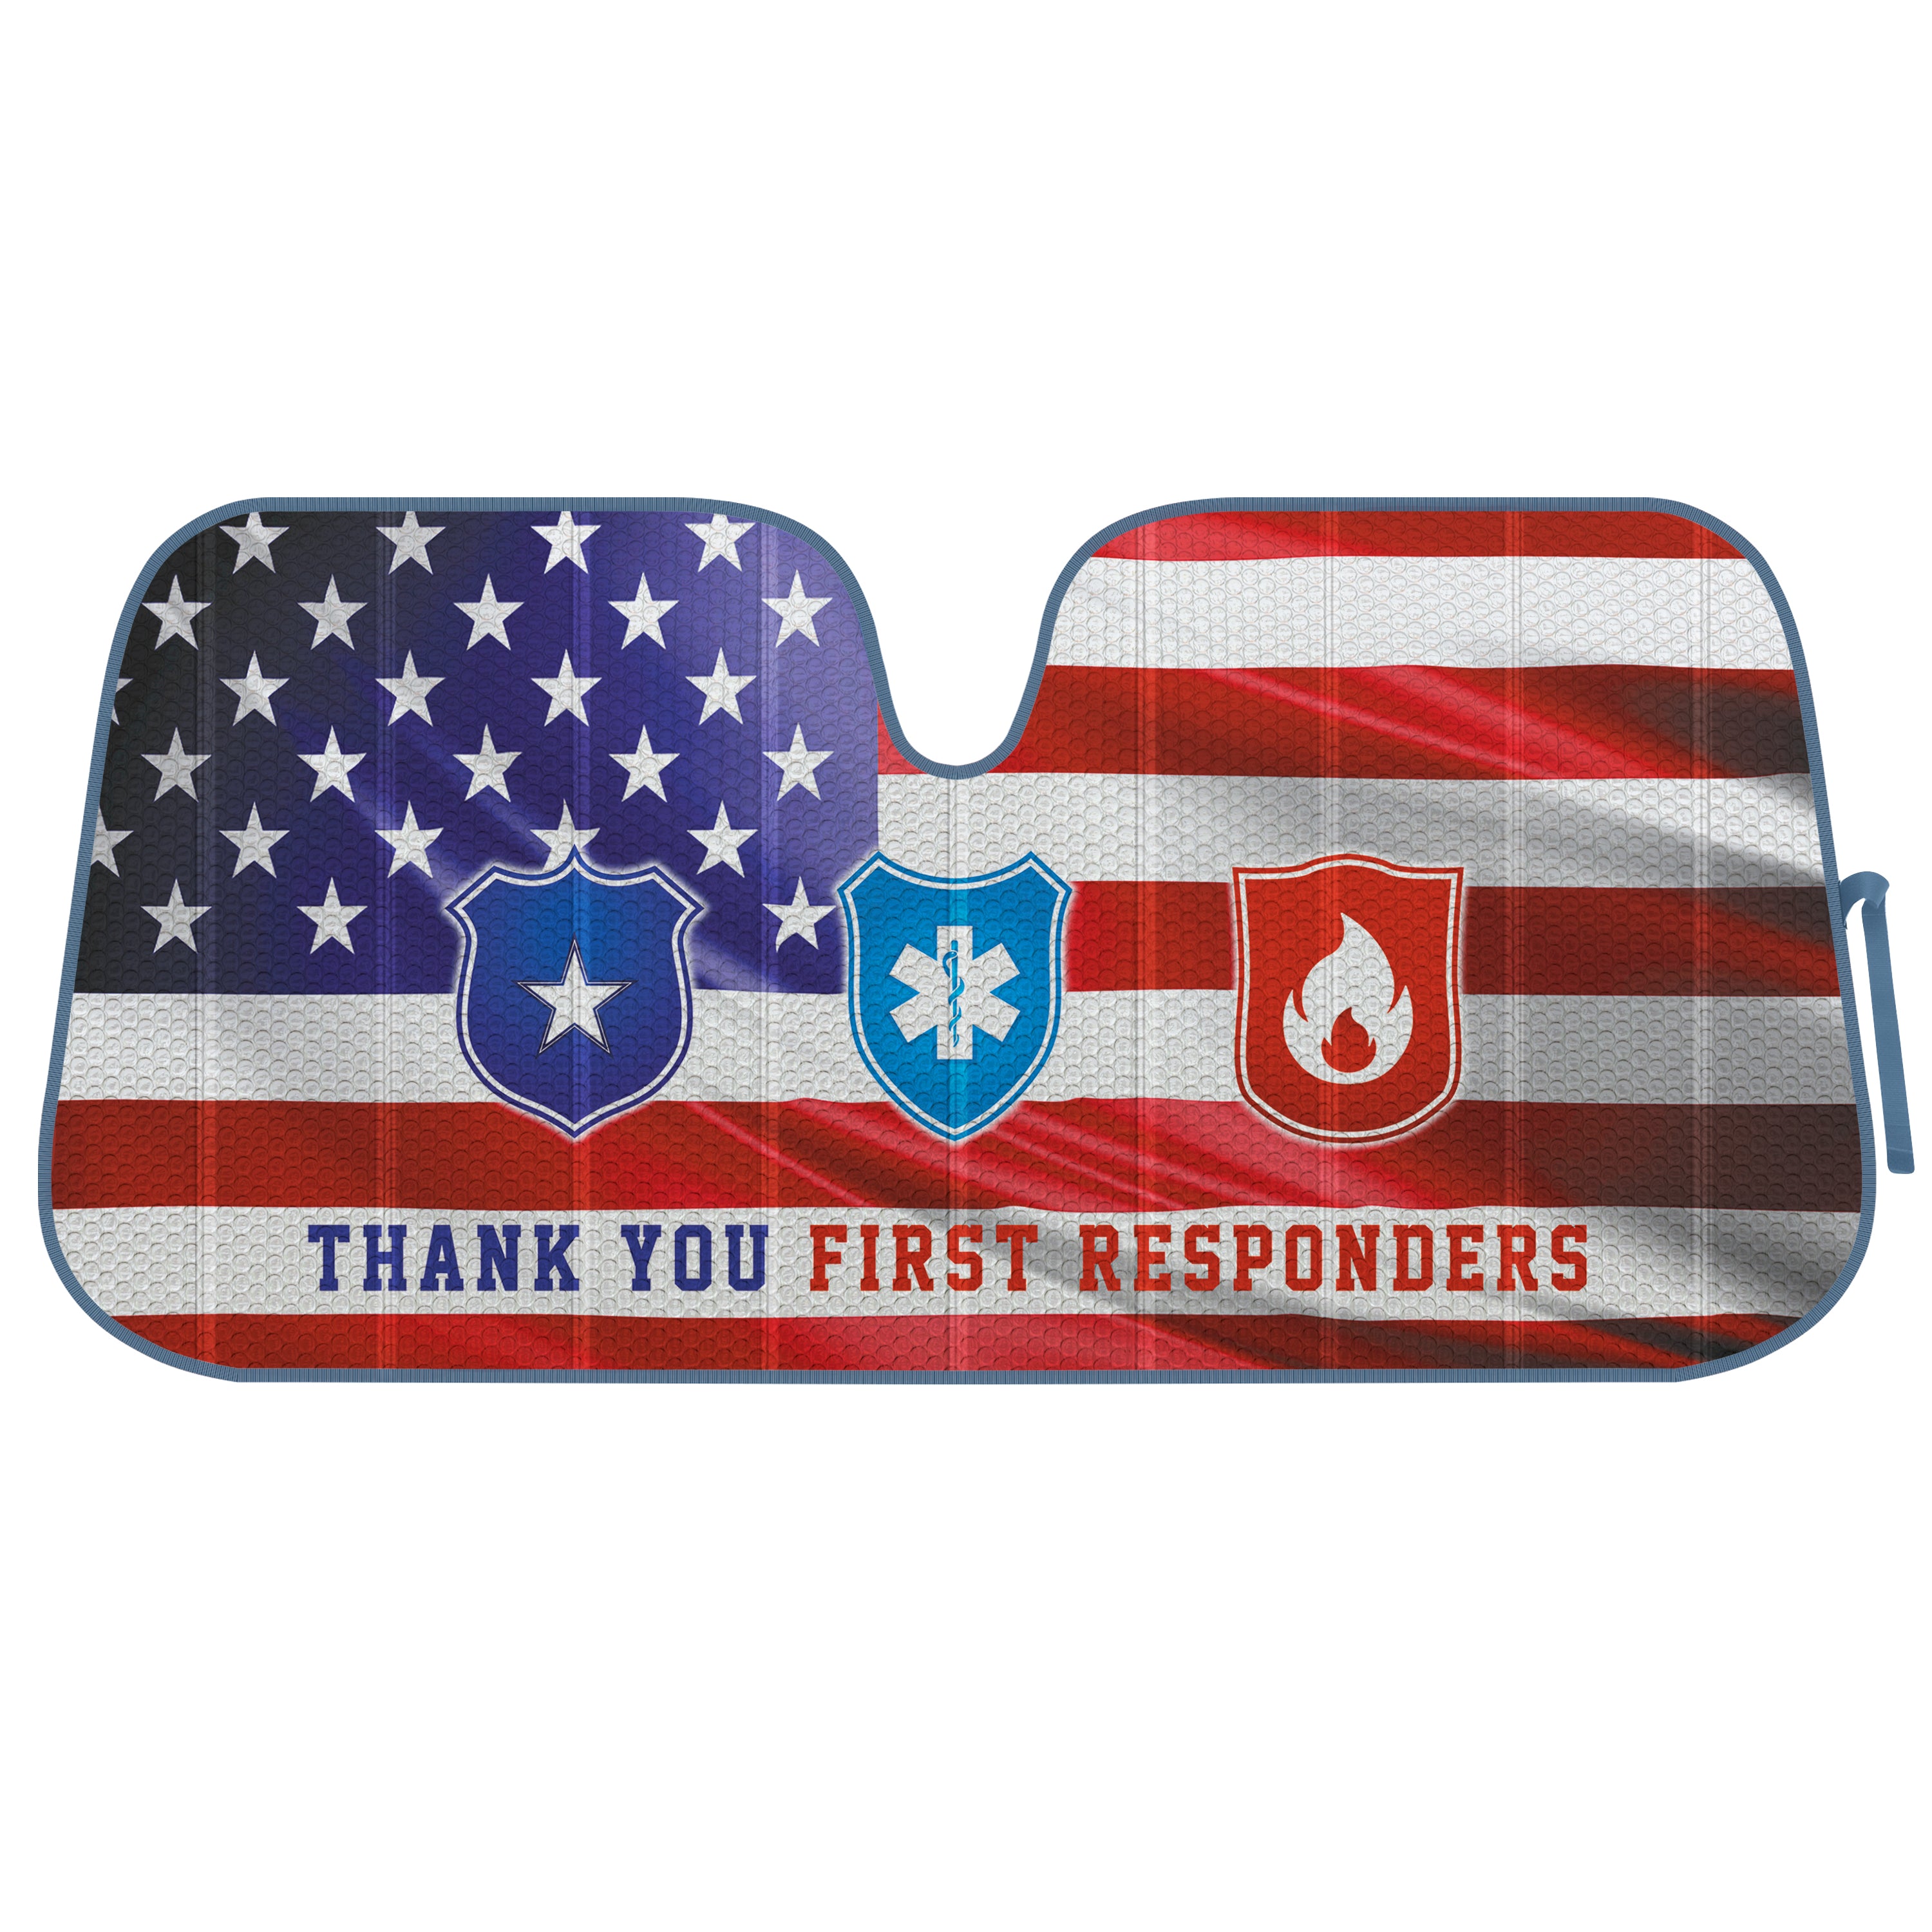 BDK Thank You First Responders Front Windshield Auto Sun Shade, Patriotic American Flag Design, Accordion Folding Sunshade Visor for Car Truck SUV-Blocks UV Rays, Keeps Your Vehicle Cool-58 x 27 Inch